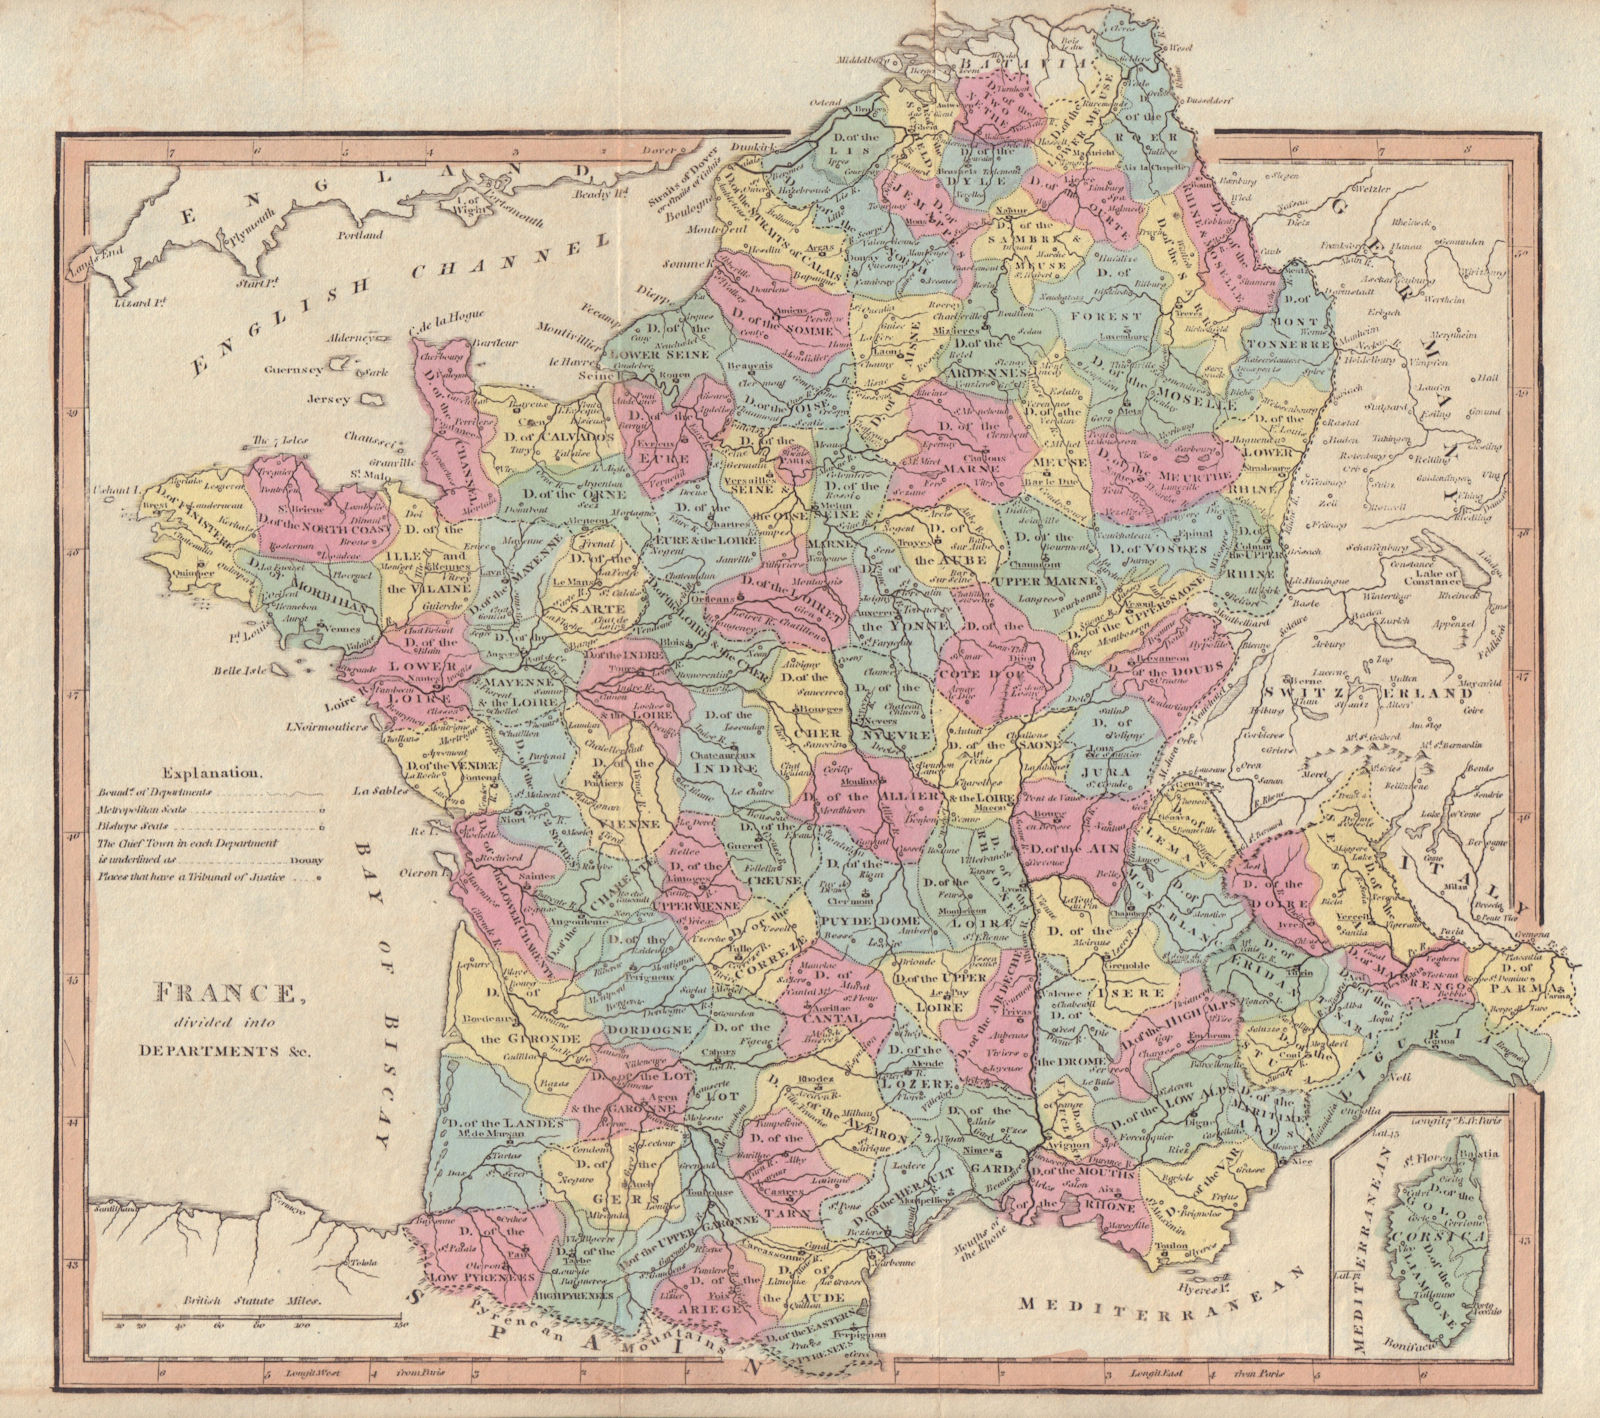 Associate Product France divided into Departments. First French Empire/Republic. COOKE 1817 map